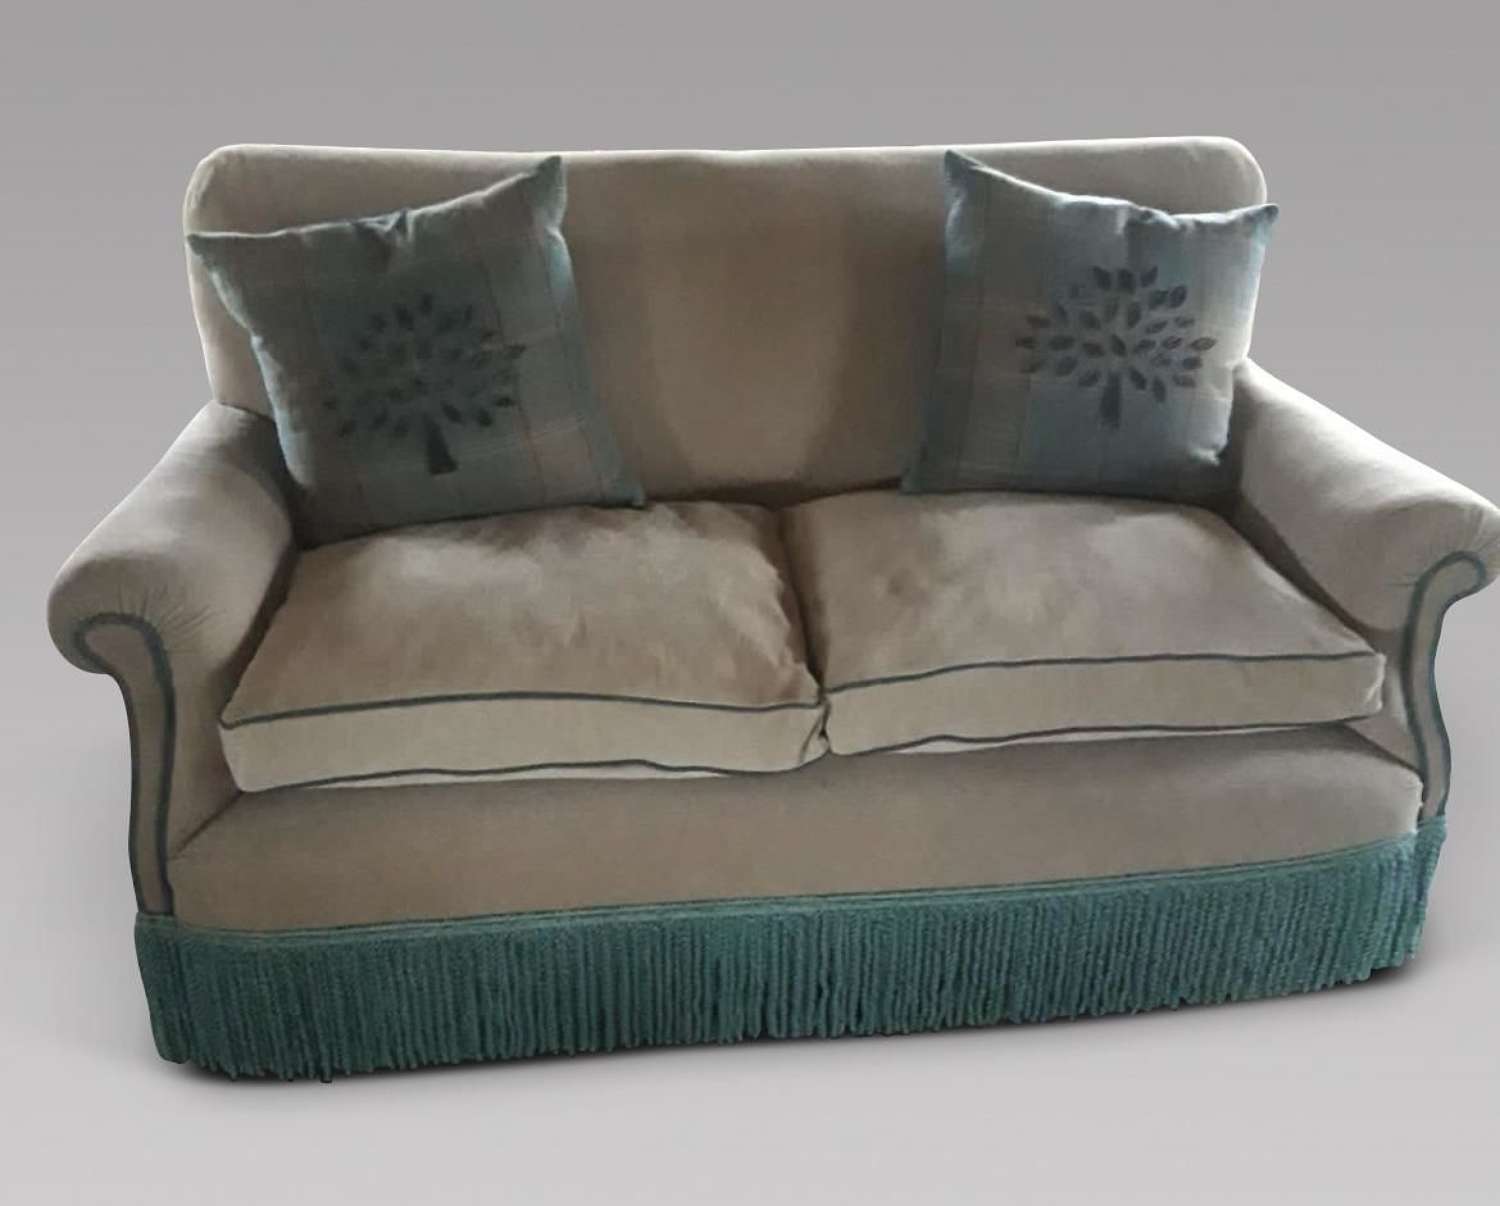 Two Seater Sofa c.1915